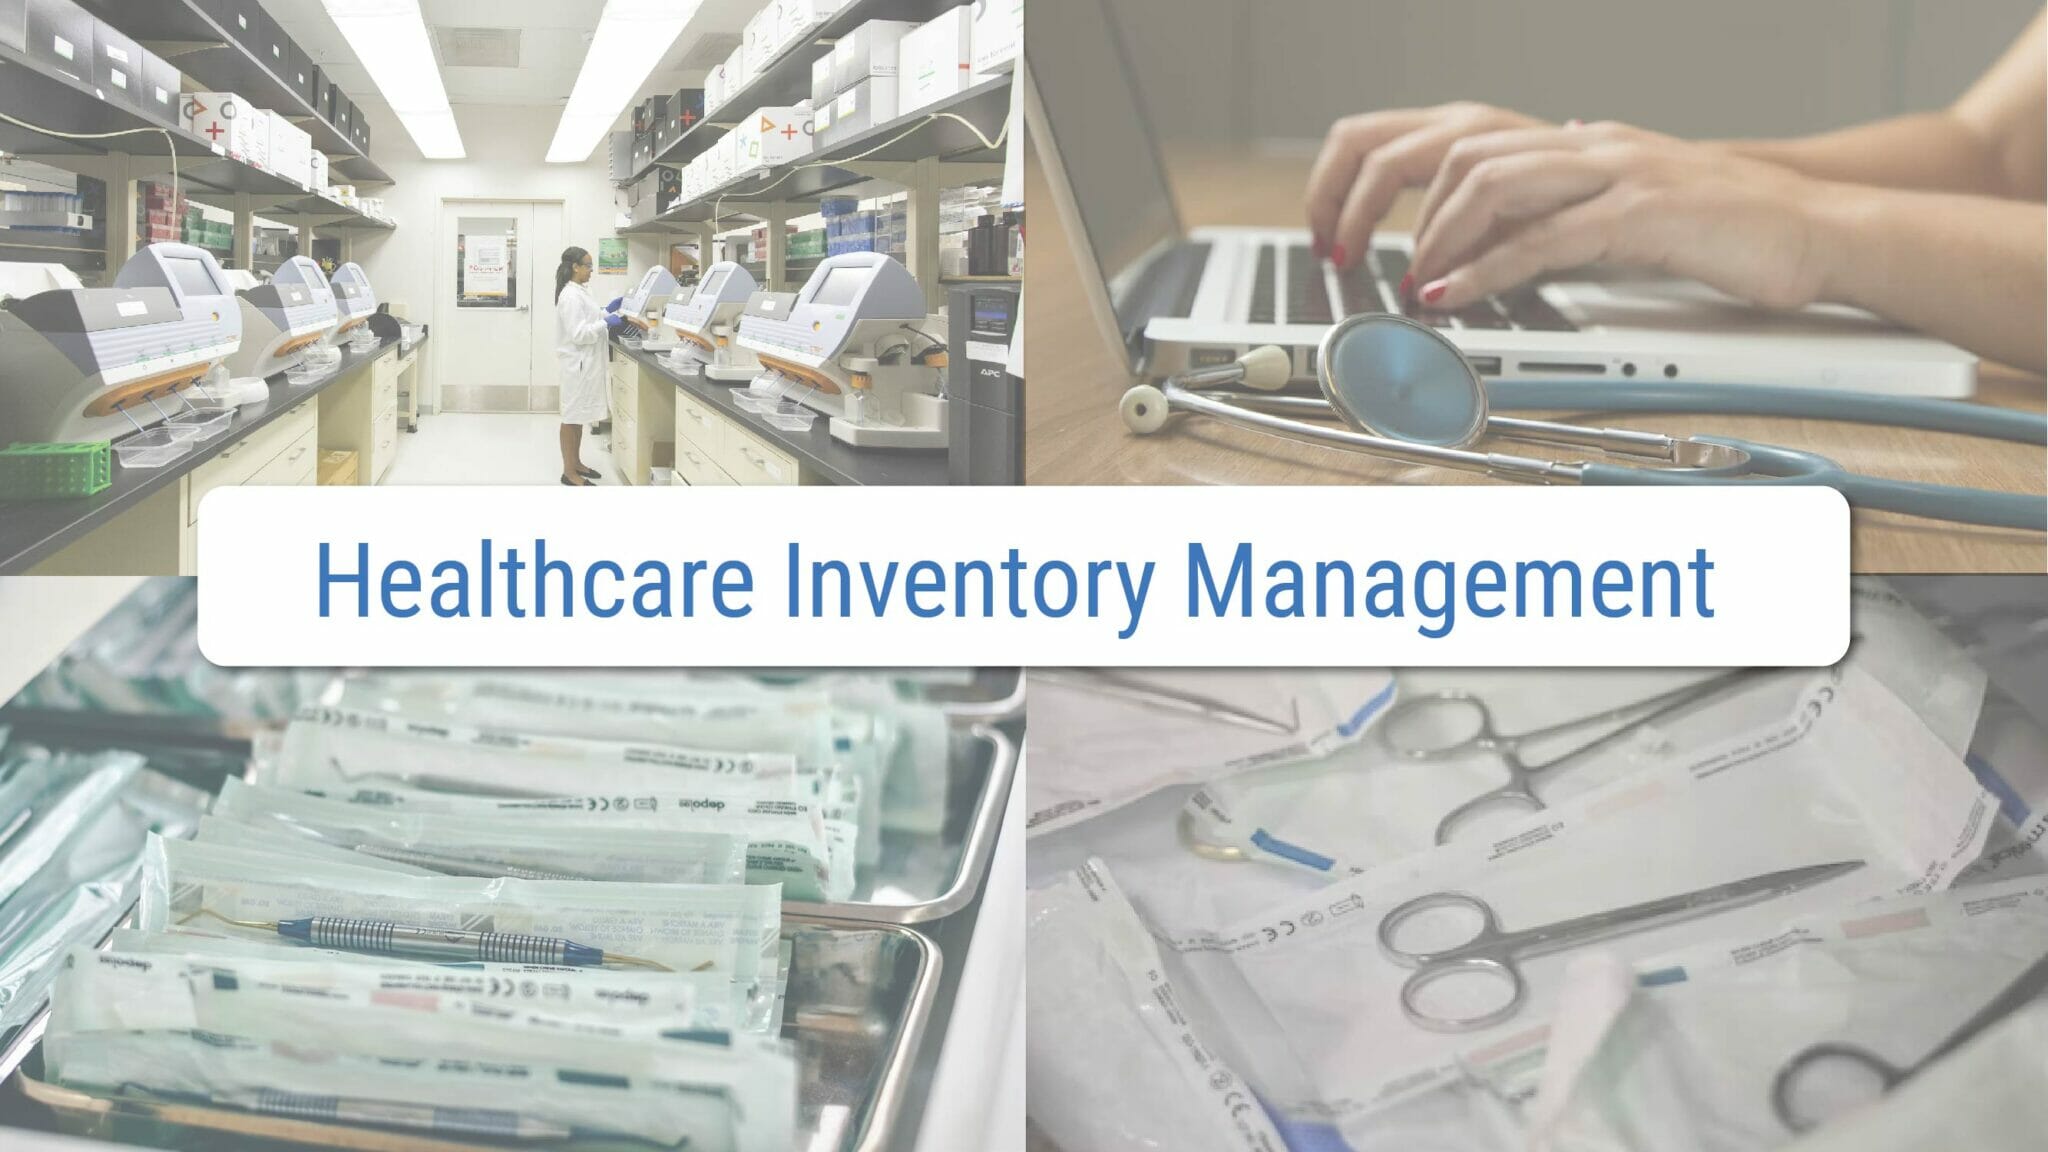 Healthcare Inventory Management blog post image with hands typing on a laptop, hospital supplies on shelves, paperwork, and surgical supplies laying out on a cart.